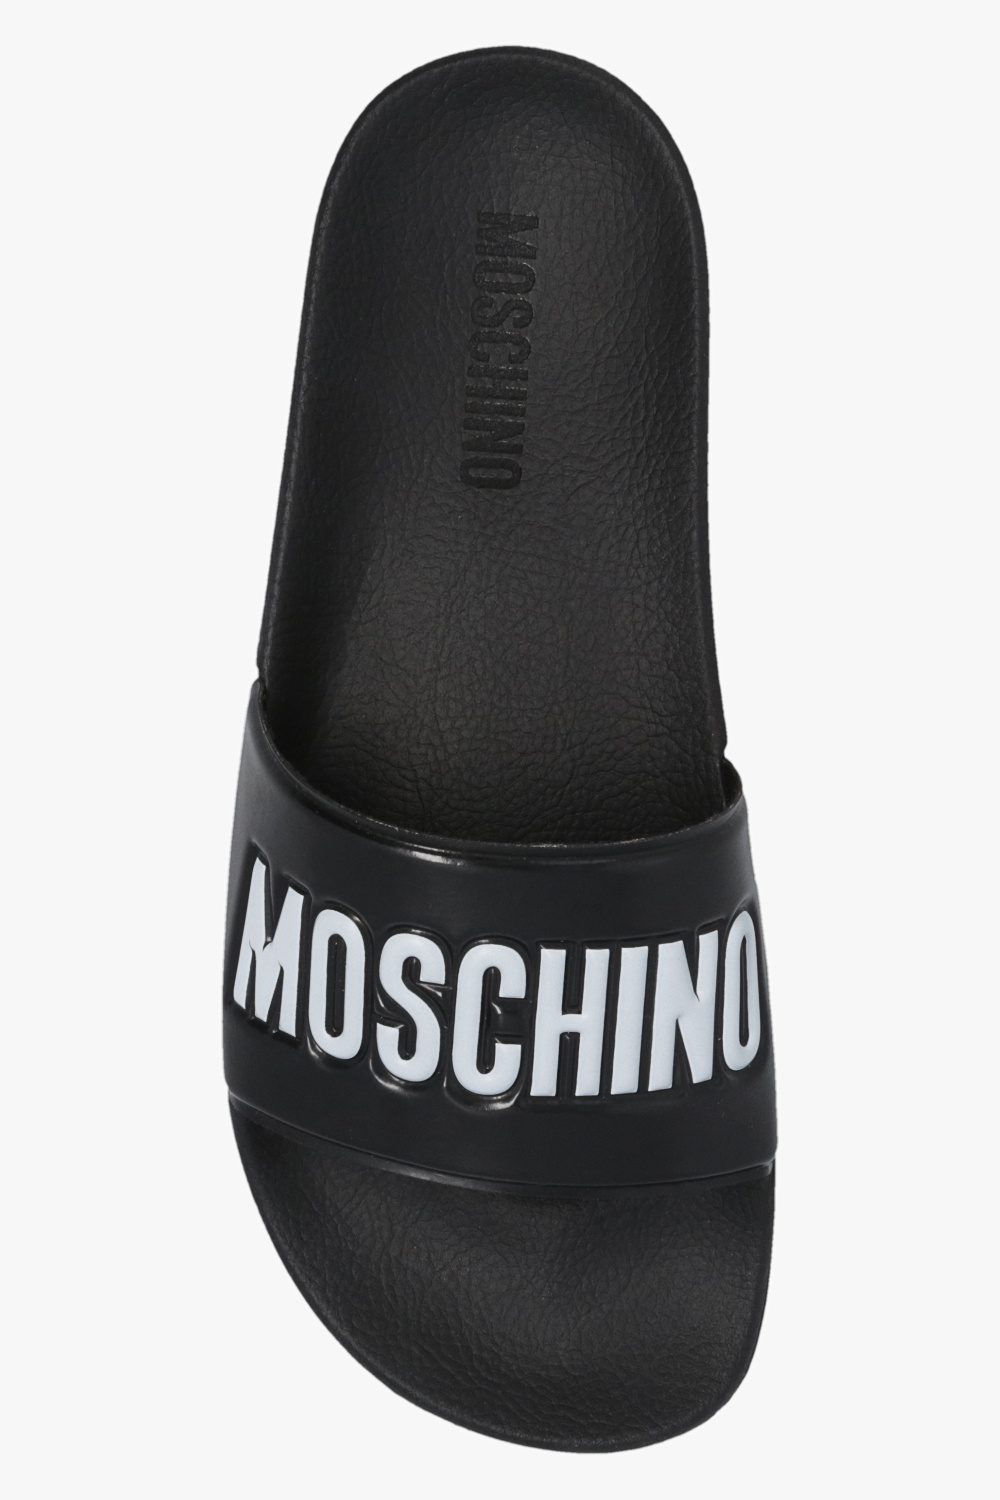 Moschino a casual court-style sneaker